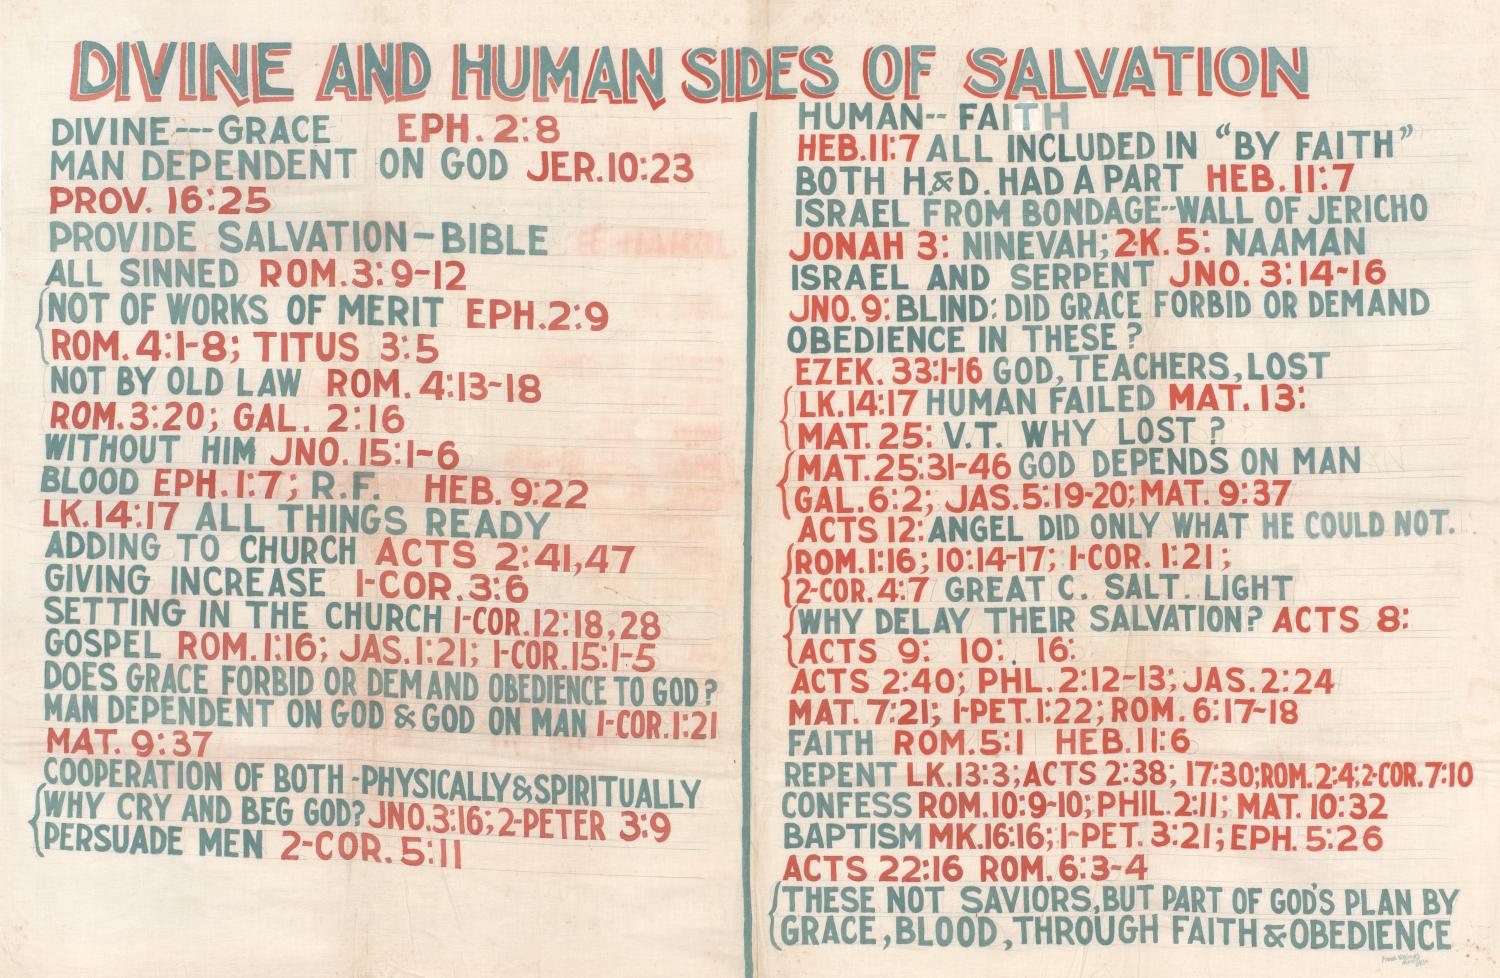 Divine and Human Sides of Salvation
                                                
                                                    [Sequence #]: 1 of 1
                                                